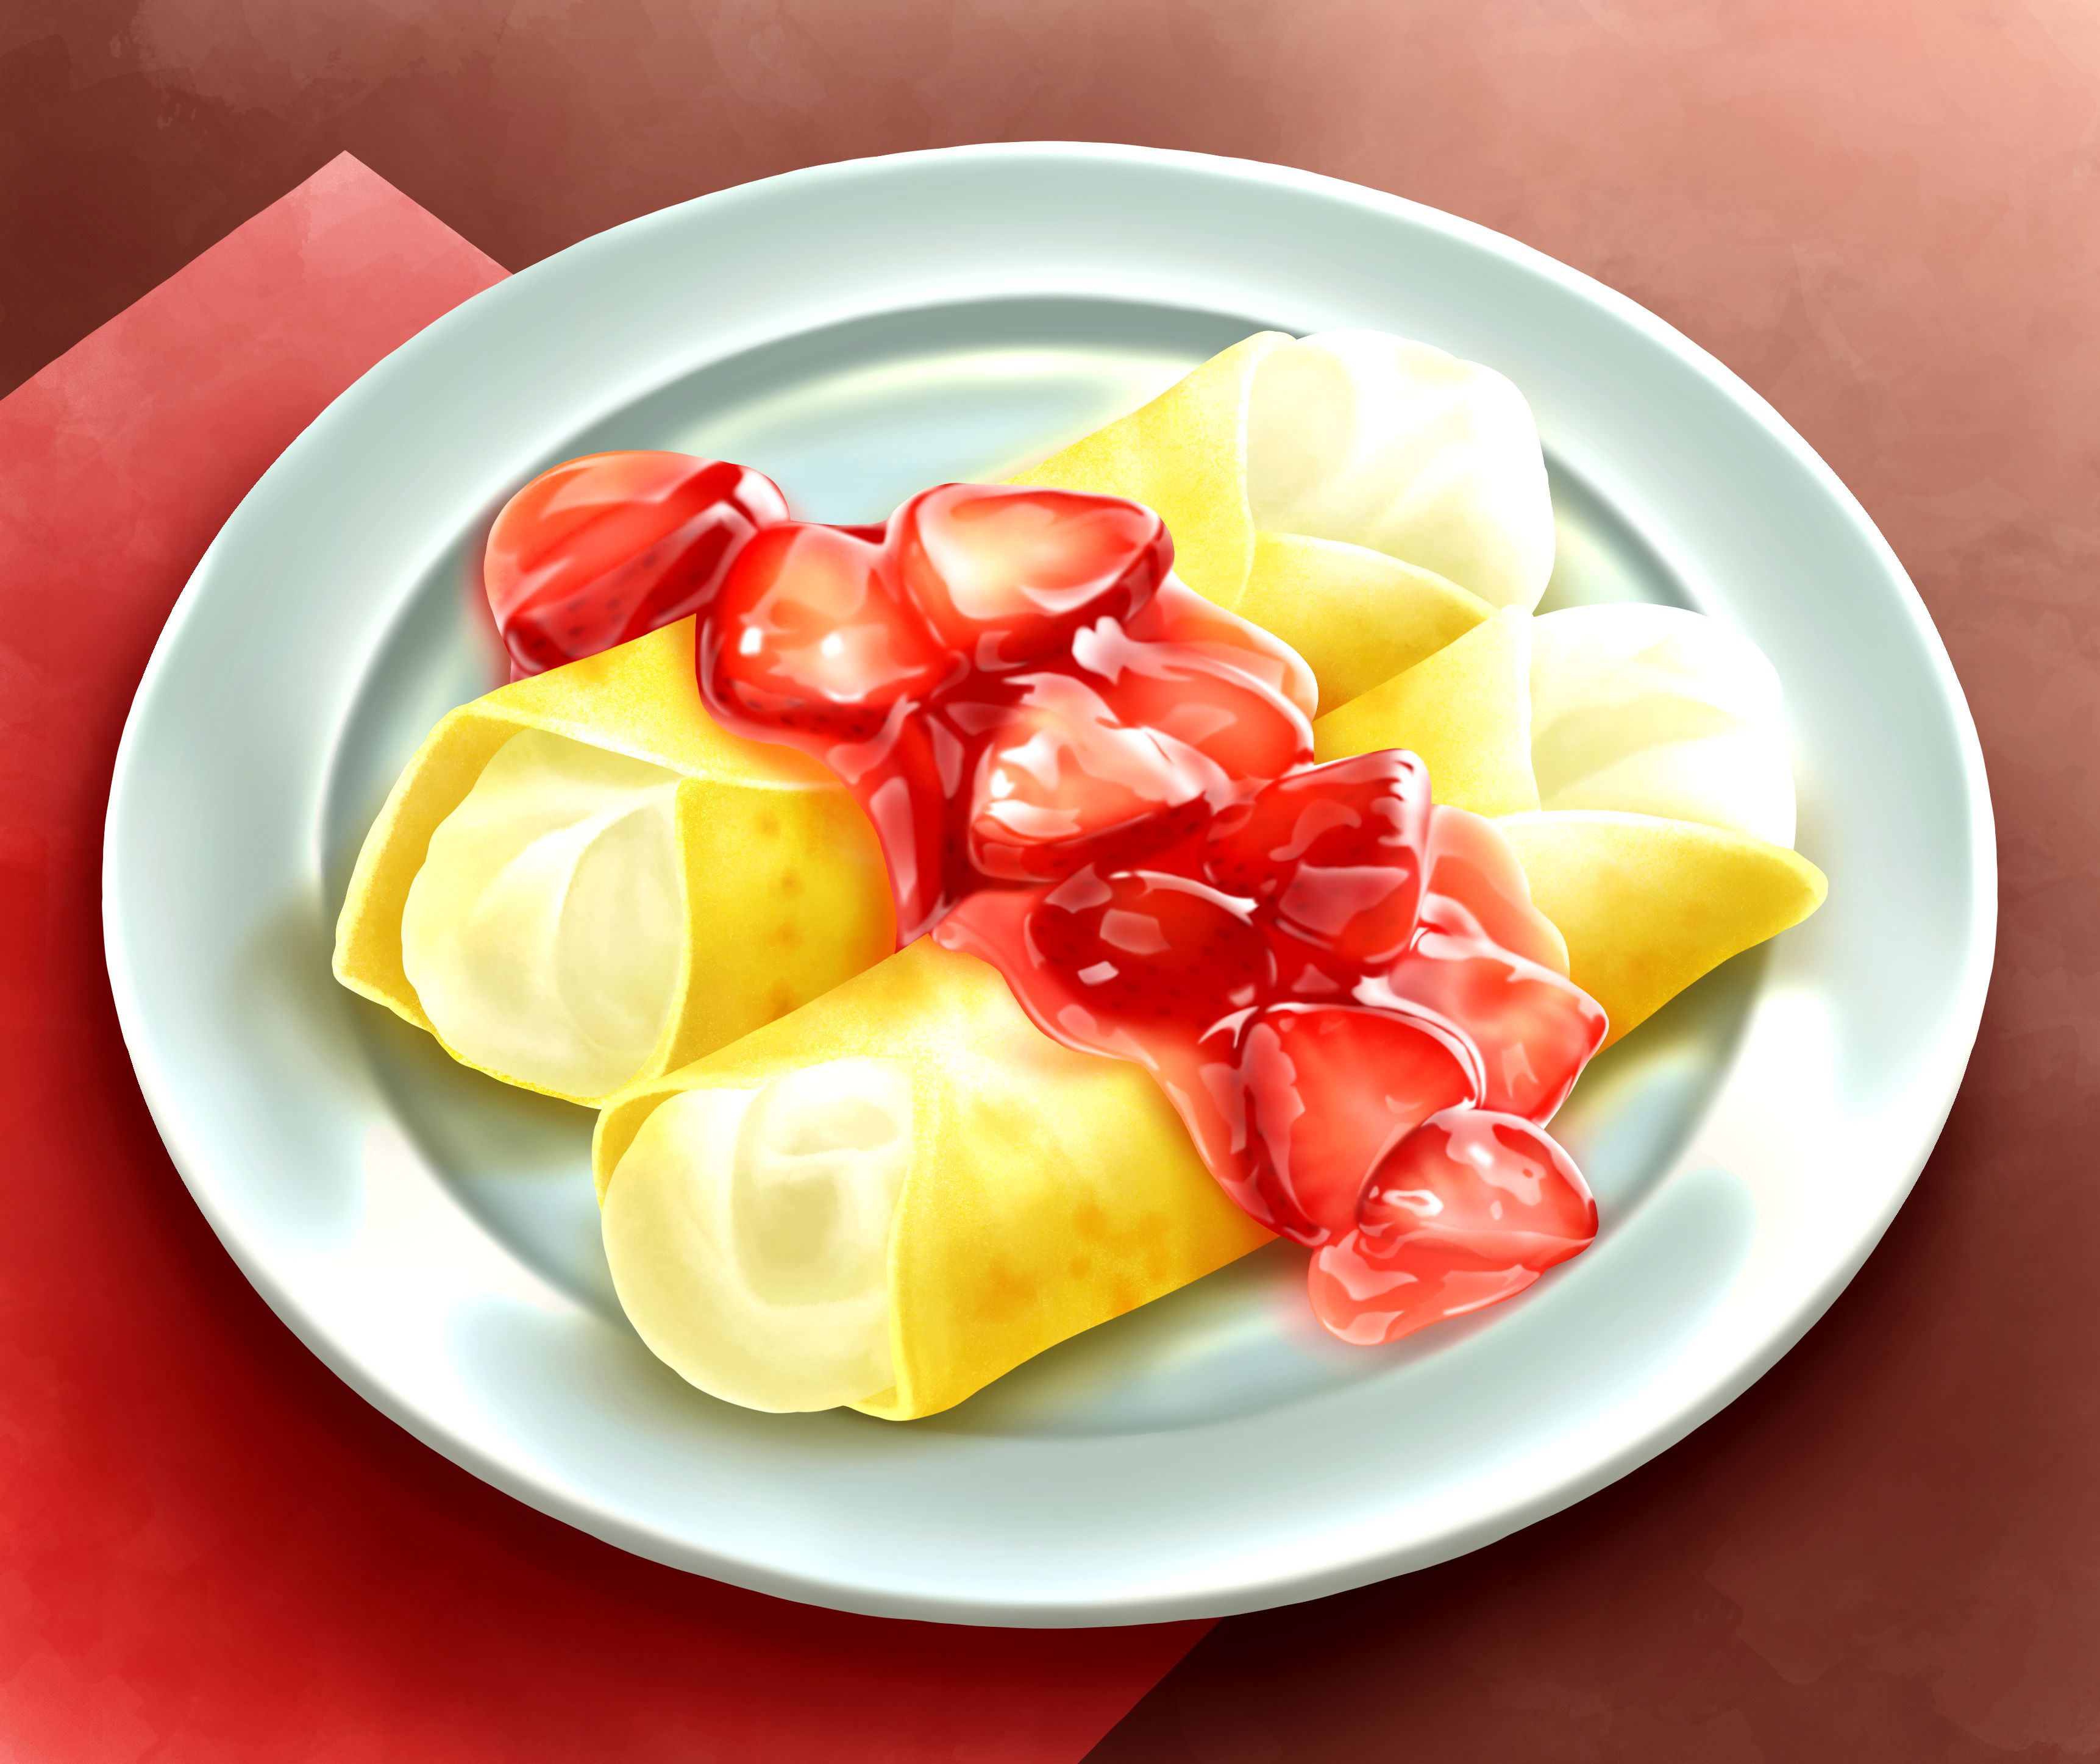 A plate of crepes with strawberry sauce on a red tablecloth. - Food